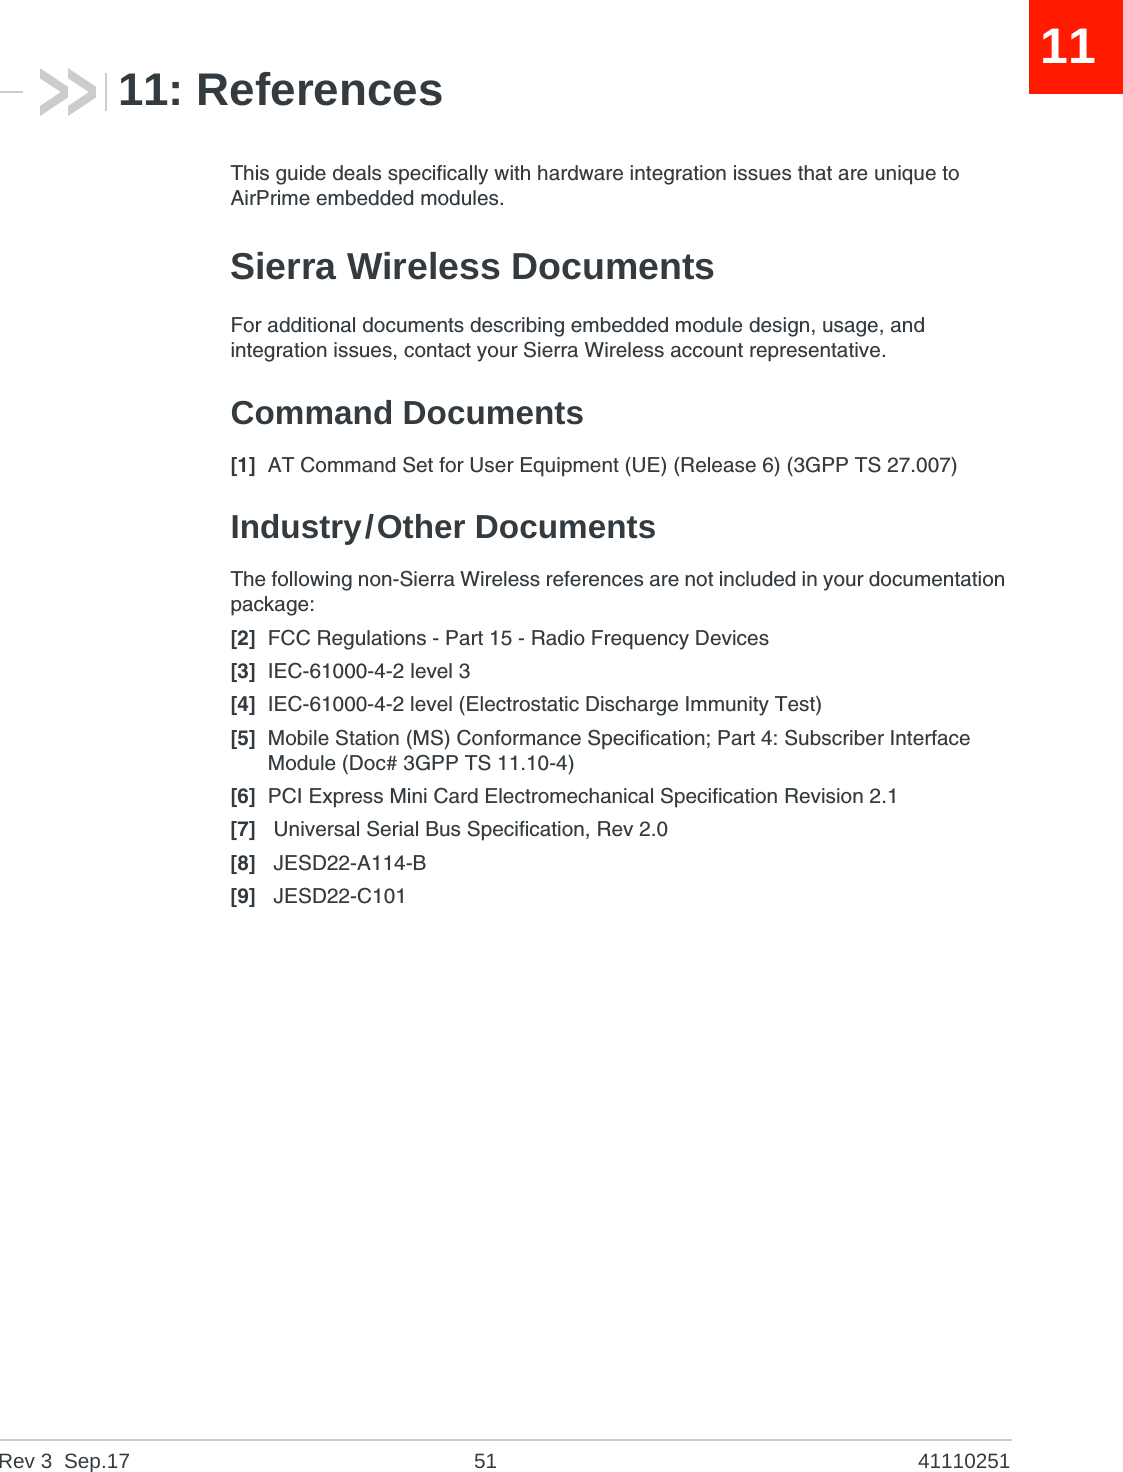 Rev 3  Sep.17 51 411102511111: ReferencesThis guide deals specifically with hardware integration issues that are unique to AirPrime embedded modules.Sierra Wireless DocumentsFor additional documents describing embedded module design, usage, and integration issues, contact your Sierra Wireless account representative.Command Documents[1] AT Command Set for User Equipment (UE) (Release 6) (3GPP TS 27.007)Industry/Other DocumentsThe following non-Sierra Wireless references are not included in your documentation package:[2] FCC Regulations - Part 15 - Radio Frequency Devices[3] IEC-61000-4-2 level 3[4] IEC-61000-4-2 level (Electrostatic Discharge Immunity Test)[5] Mobile Station (MS) Conformance Specification; Part 4: Subscriber Interface Module (Doc# 3GPP TS 11.10-4)[6] PCI Express Mini Card Electromechanical Specification Revision 2.1[7]  Universal Serial Bus Specification, Rev 2.0[8]  JESD22-A114-B[9]  JESD22-C101